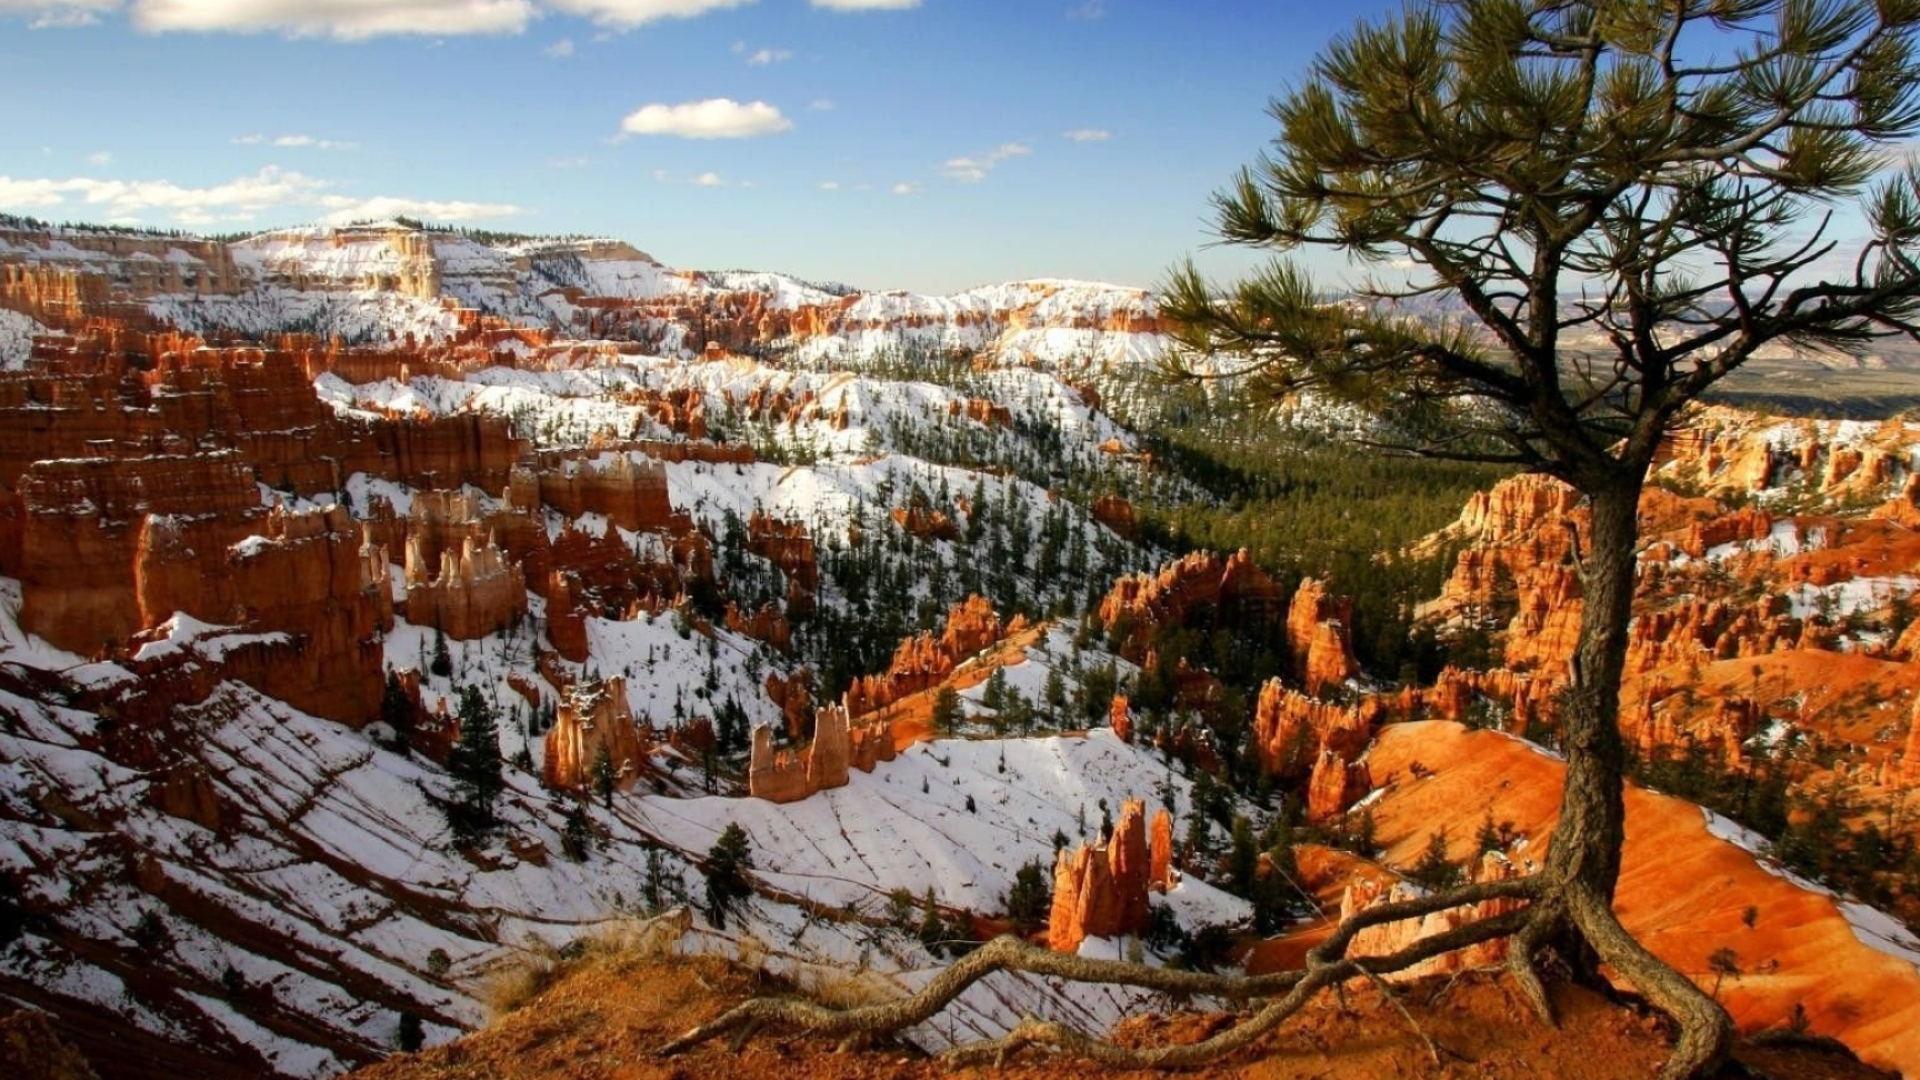 Bryce Canyon National Park, Free download wallpaper, High definition, Explore the collection, 1920x1080 Full HD Desktop